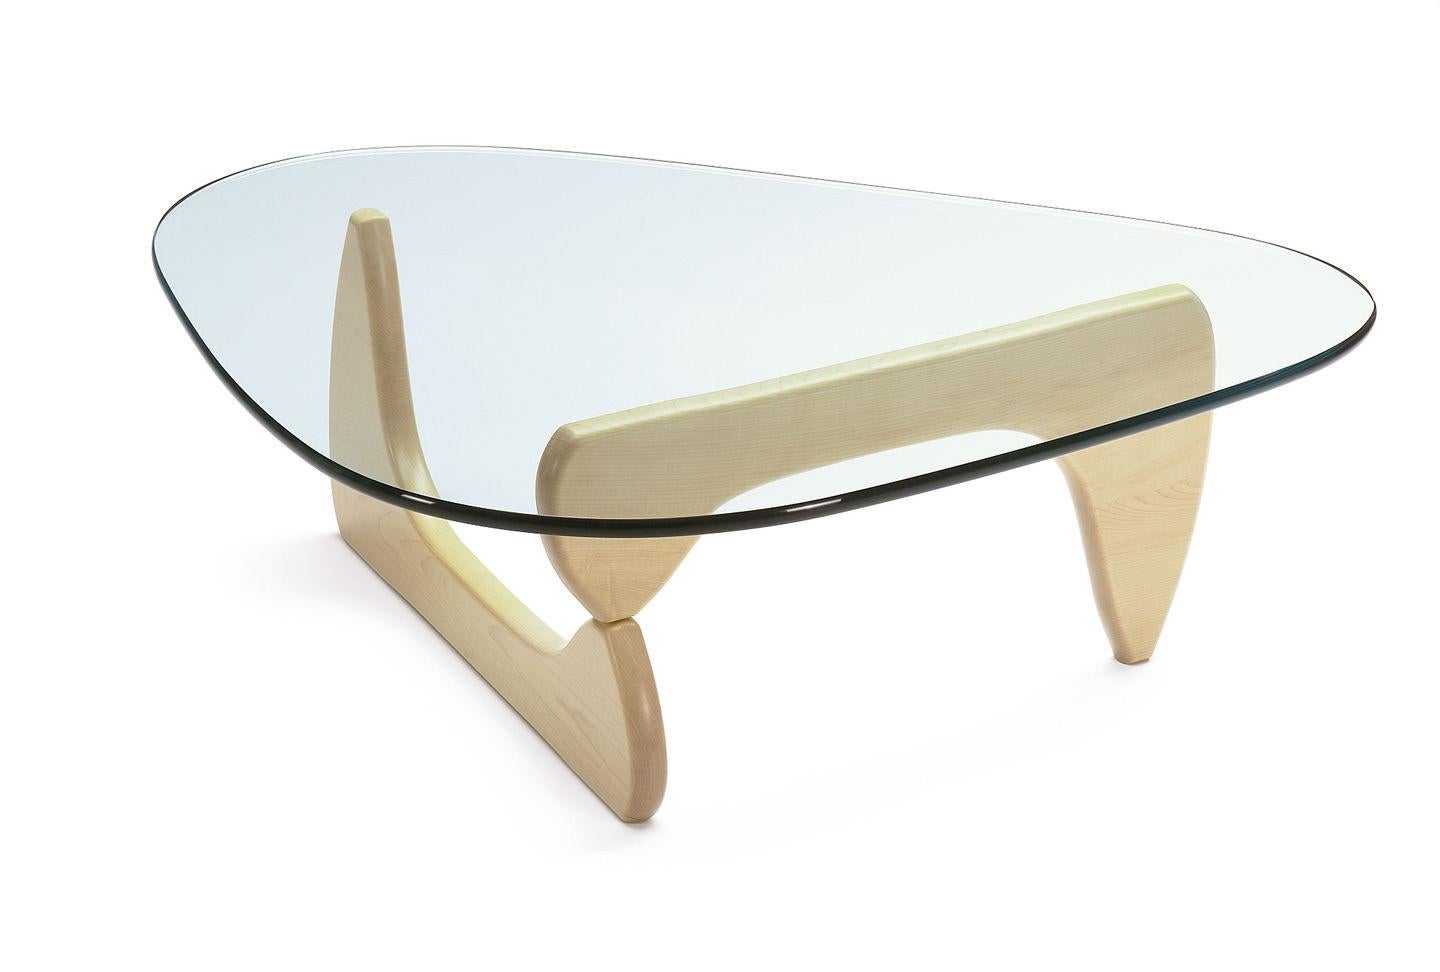 Sculptural coffee table designed by Isamu Noguchi in 1944.
Manufactured by Vitra, Switzerland.

The organic forms of the Coffee Table designed by Isamu Noguchi, who was active both as a sculptor and designer, are reminiscent of his biomorphic